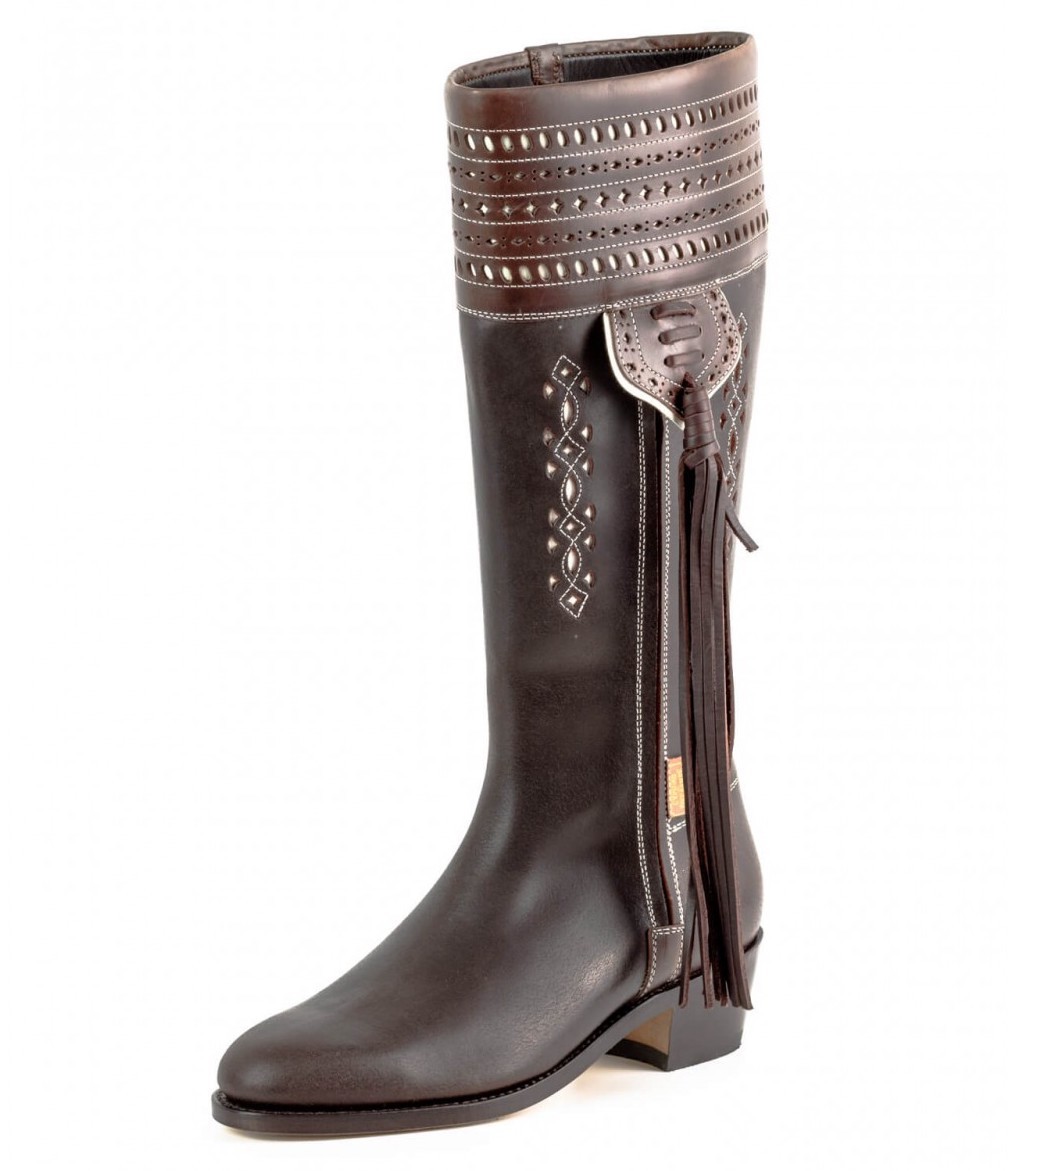 Traditional spanish horse riding boots with tassels Original